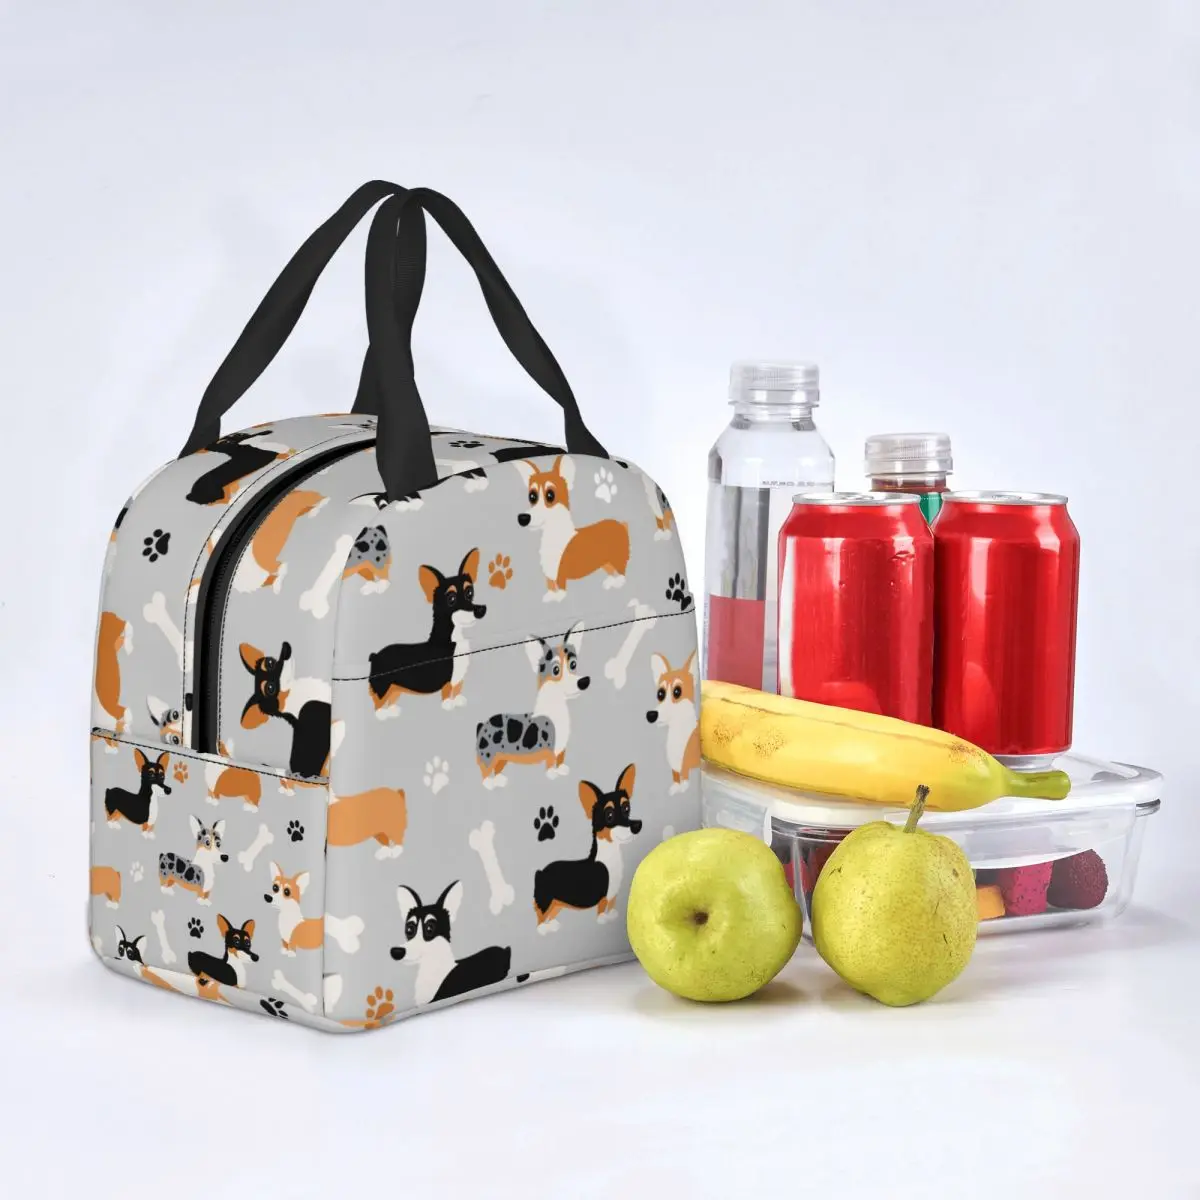 Cute Corgi Pattern Gray Lunch Bags Portable Insulated Oxford Cooler Bags Dog Thermal Cold Food Picnic Tote for Women Girl